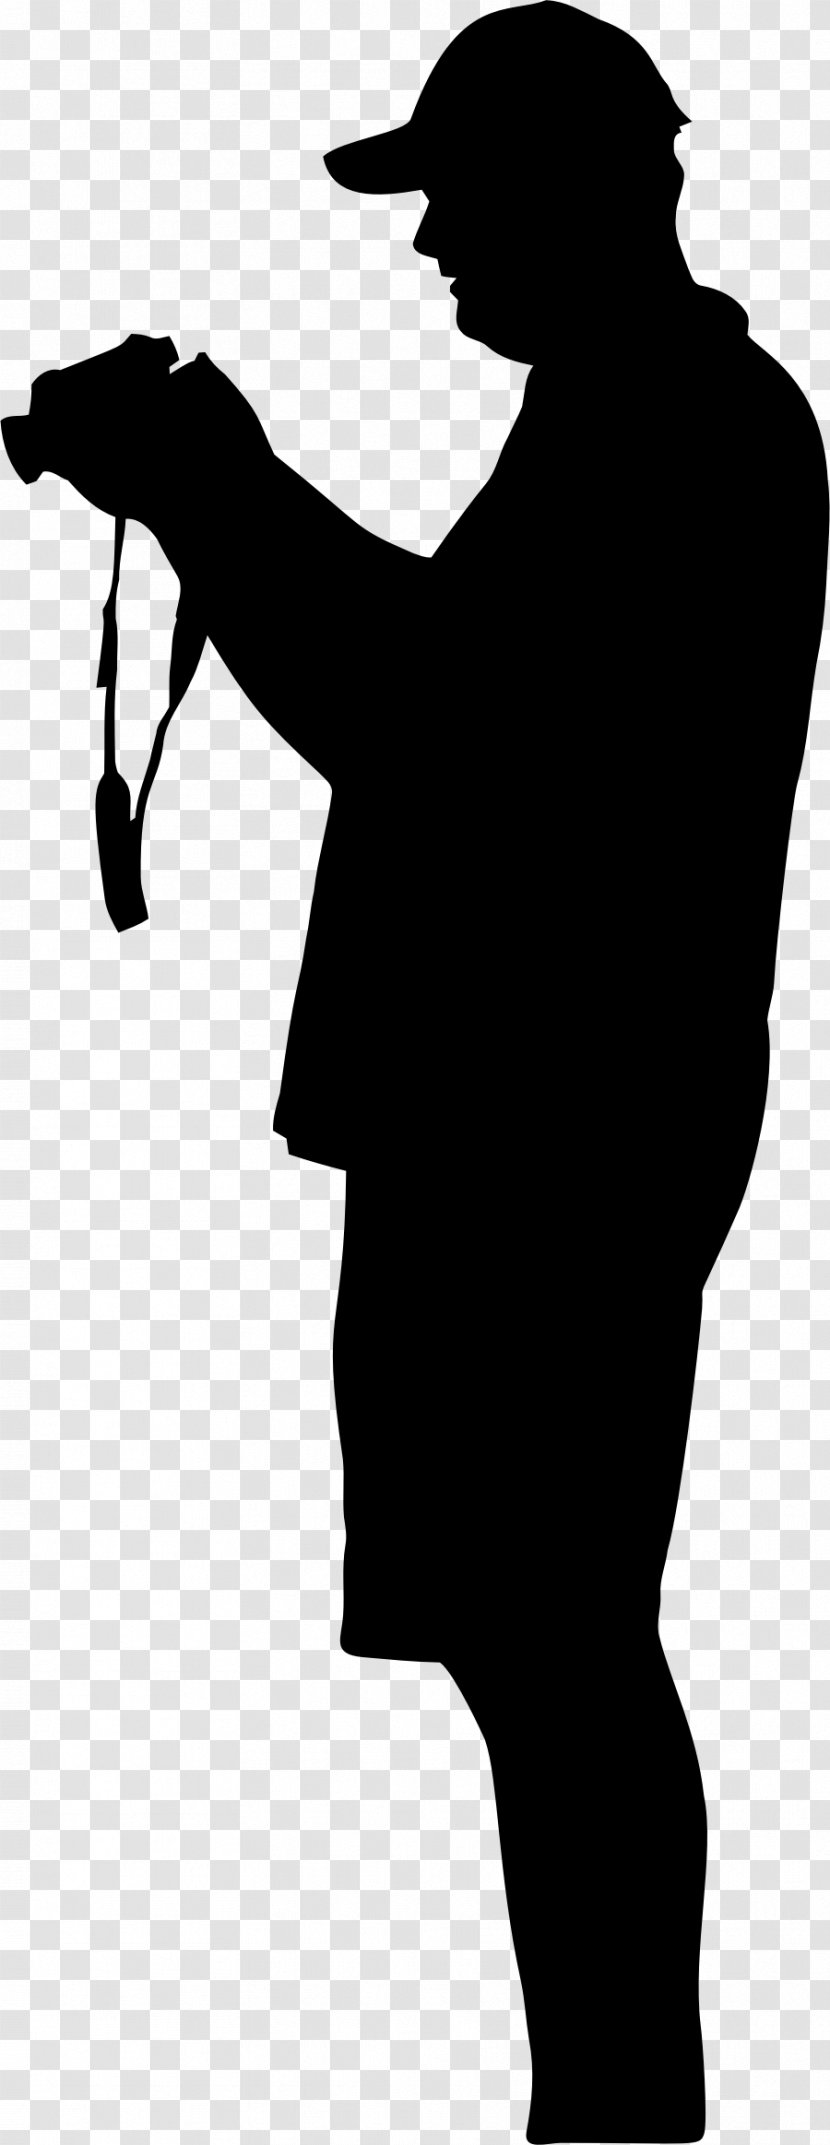 Silhouette Black And White Clip Art - Man Transparent PNG